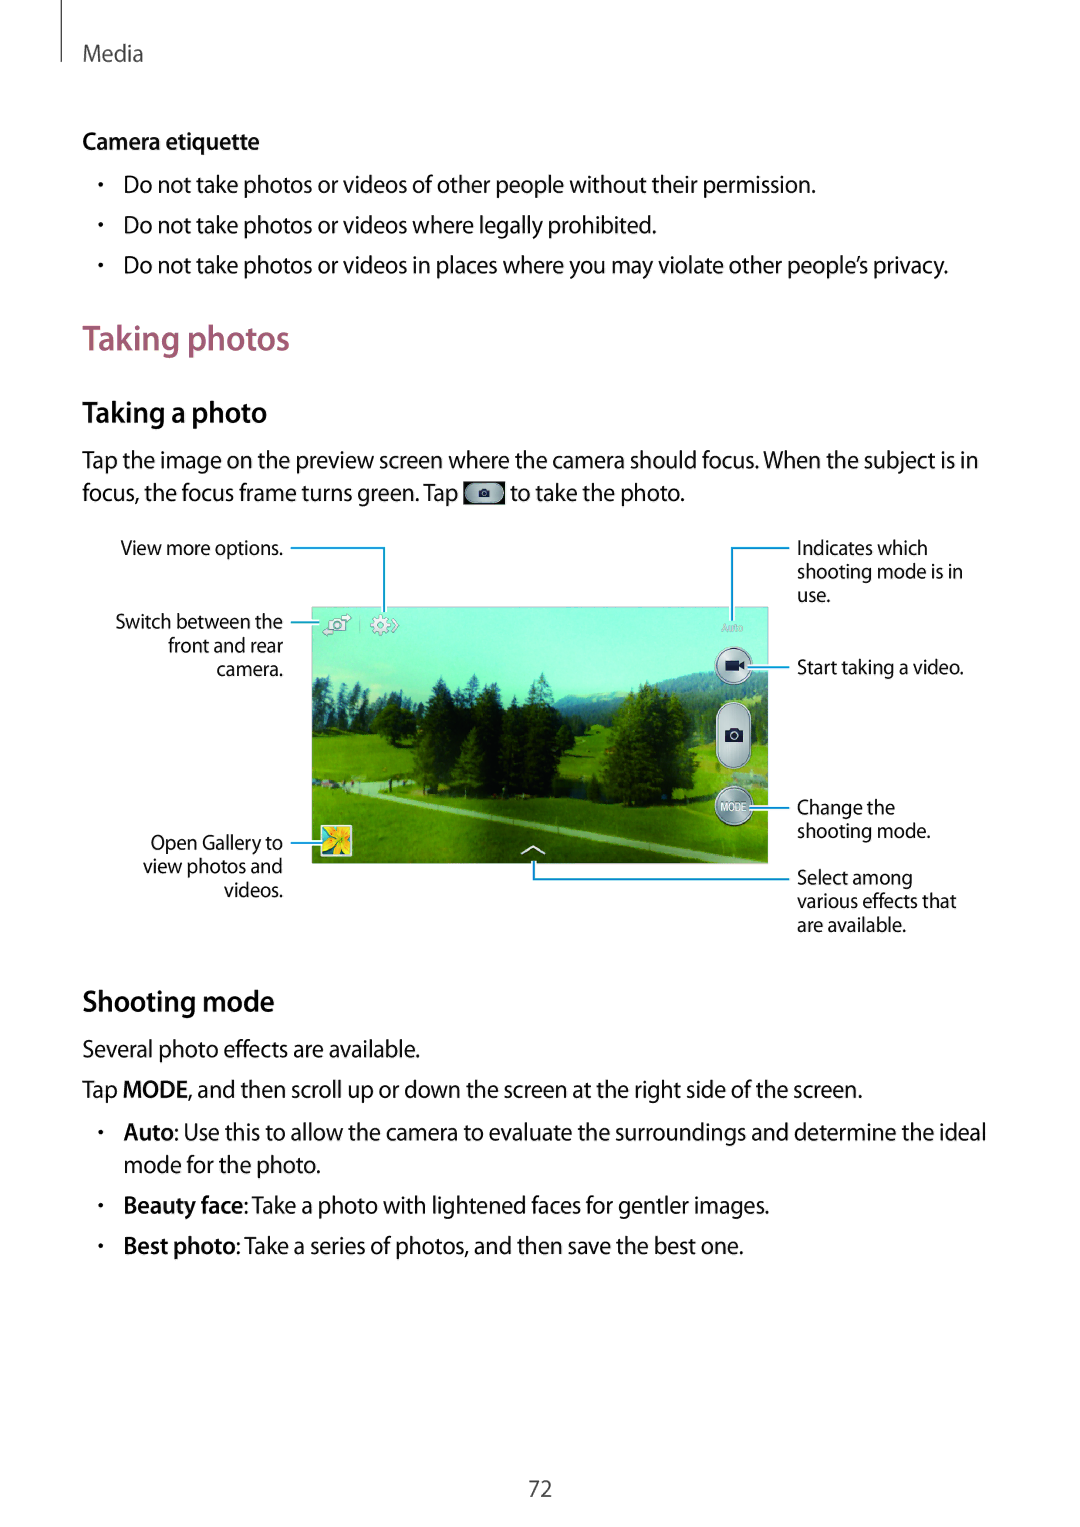 Samsung GT-I9195 user manual Taking photos, Taking a photo, Shooting mode, Camera etiquette 